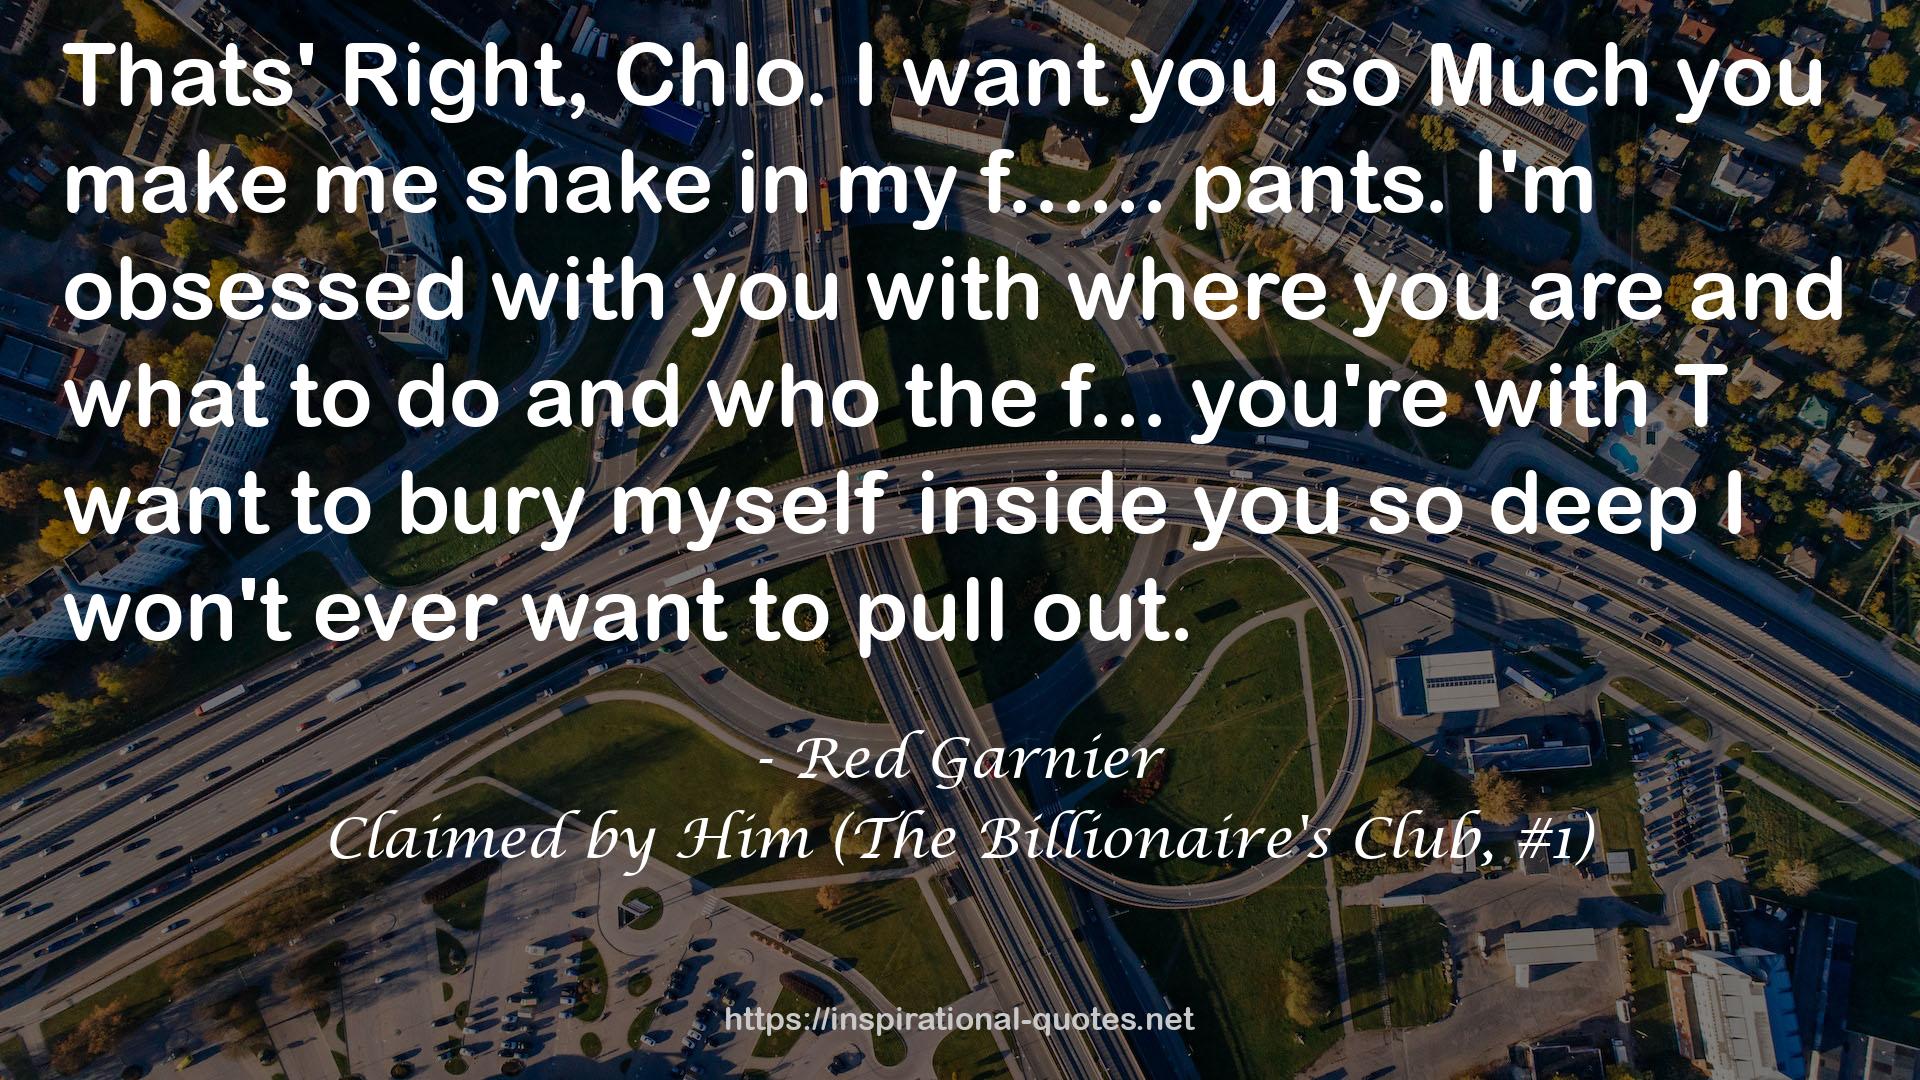 Claimed by Him (The Billionaire's Club, #1) QUOTES